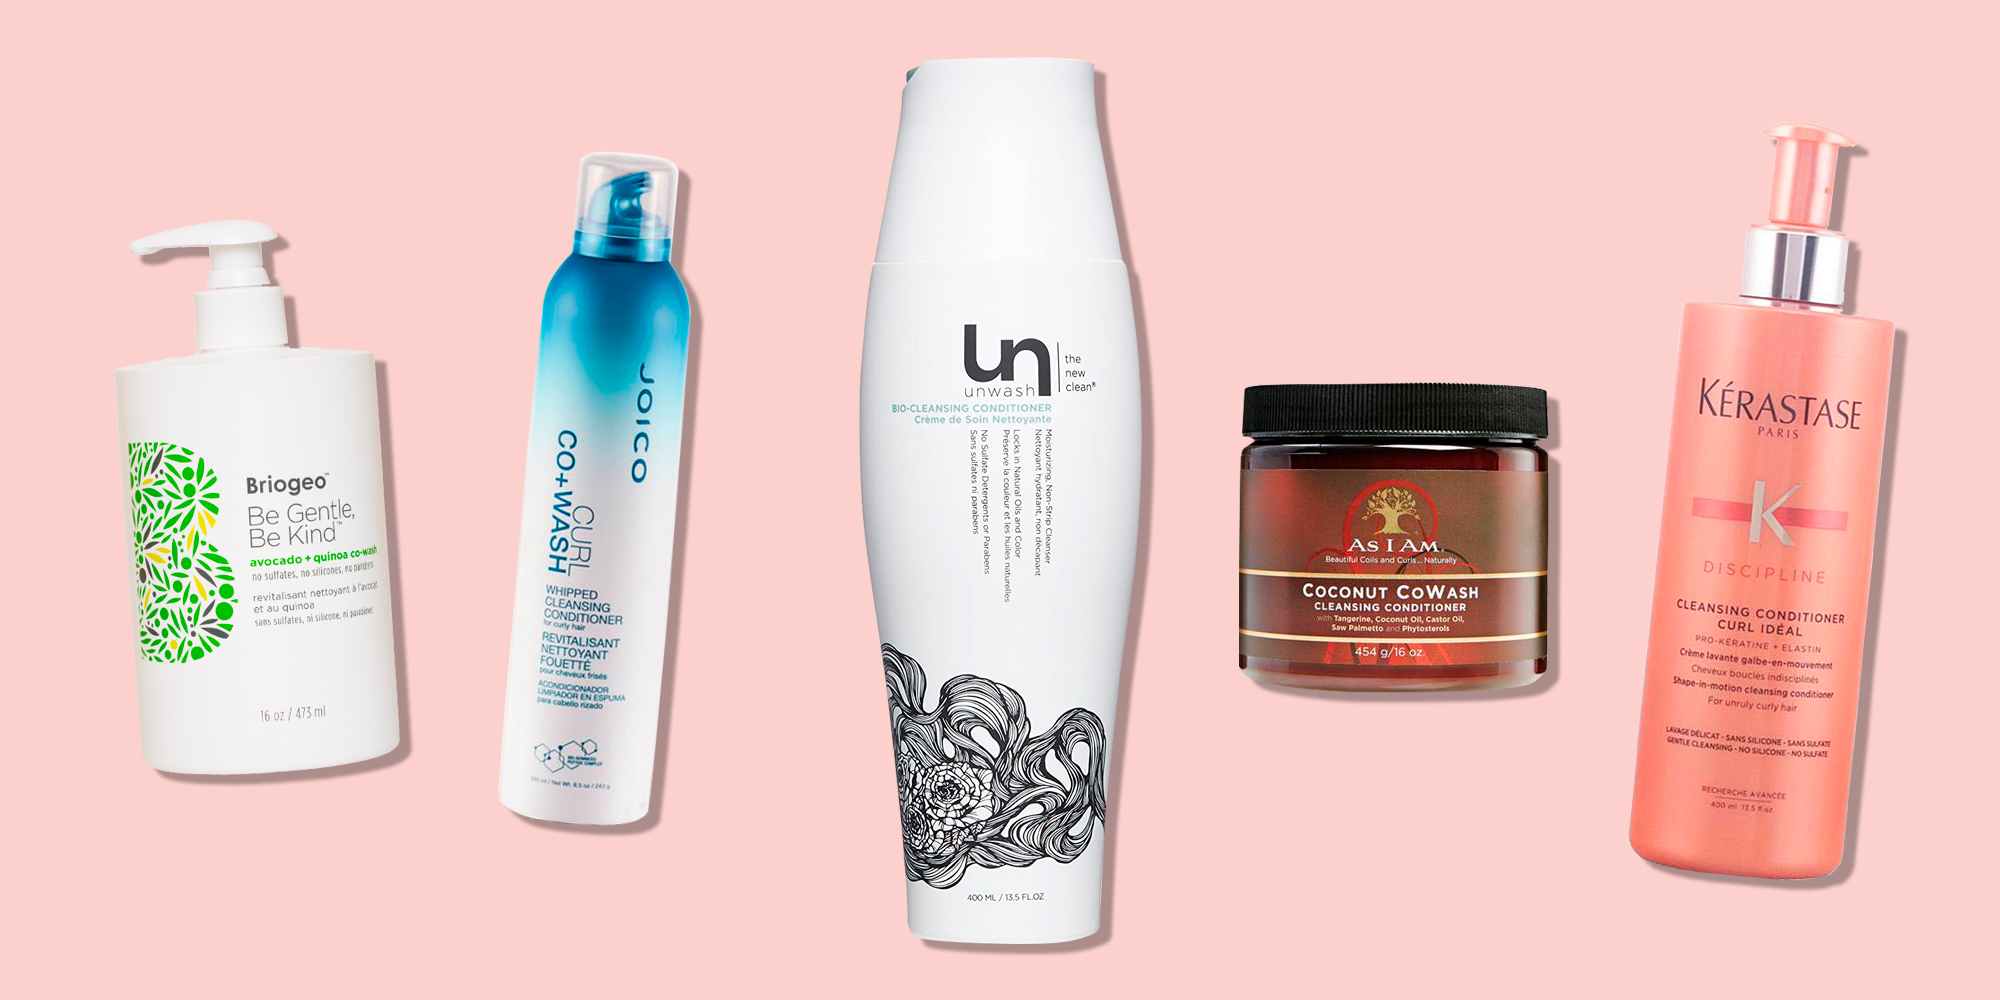 12 Best Cleansing Conditioners Shampooing Conditioners To Try